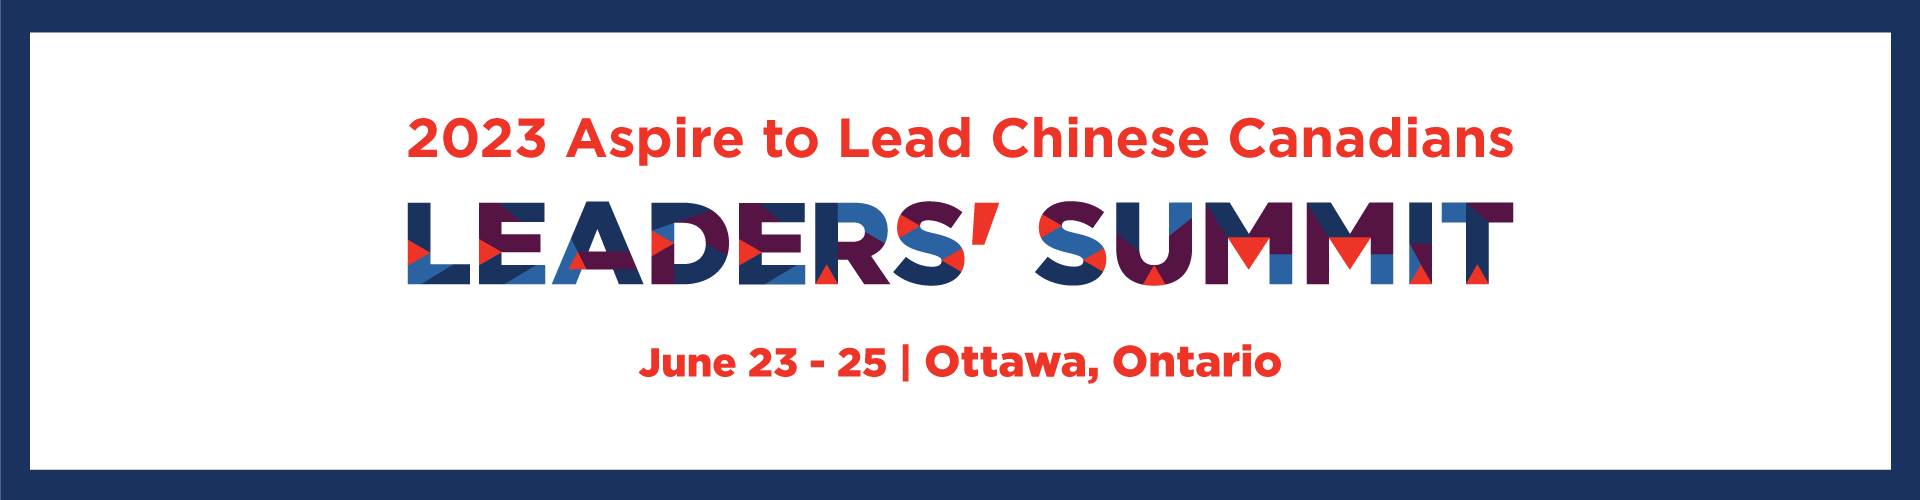 2023 Aspire to Lead Chinese Canadians Leaders' Summit - June 23-25 | Ottawa, Ontario